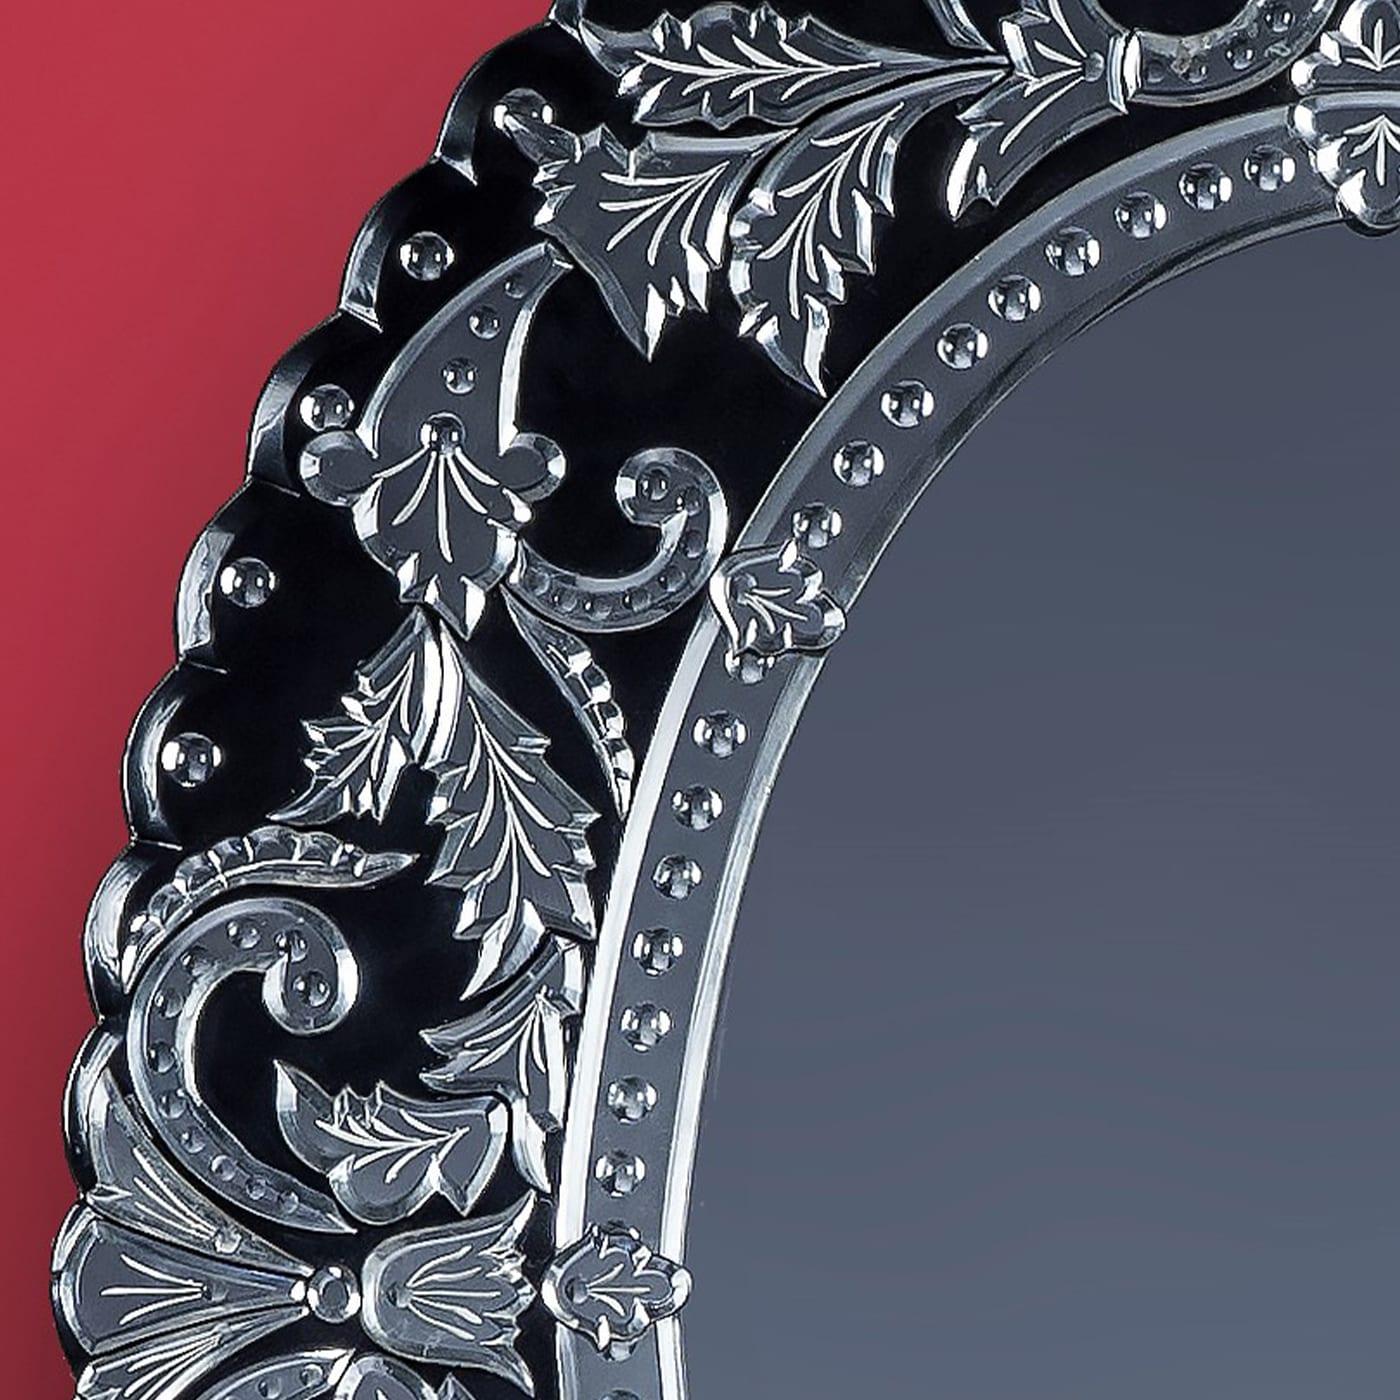 Luxurious oval mirror in 19th-century French style Murano glass made by Fratelli Tosi based on Fratelli Barbini design. The band that embraces the central mirror is engraved with a floral motif, the whole external frame is a succession of curls